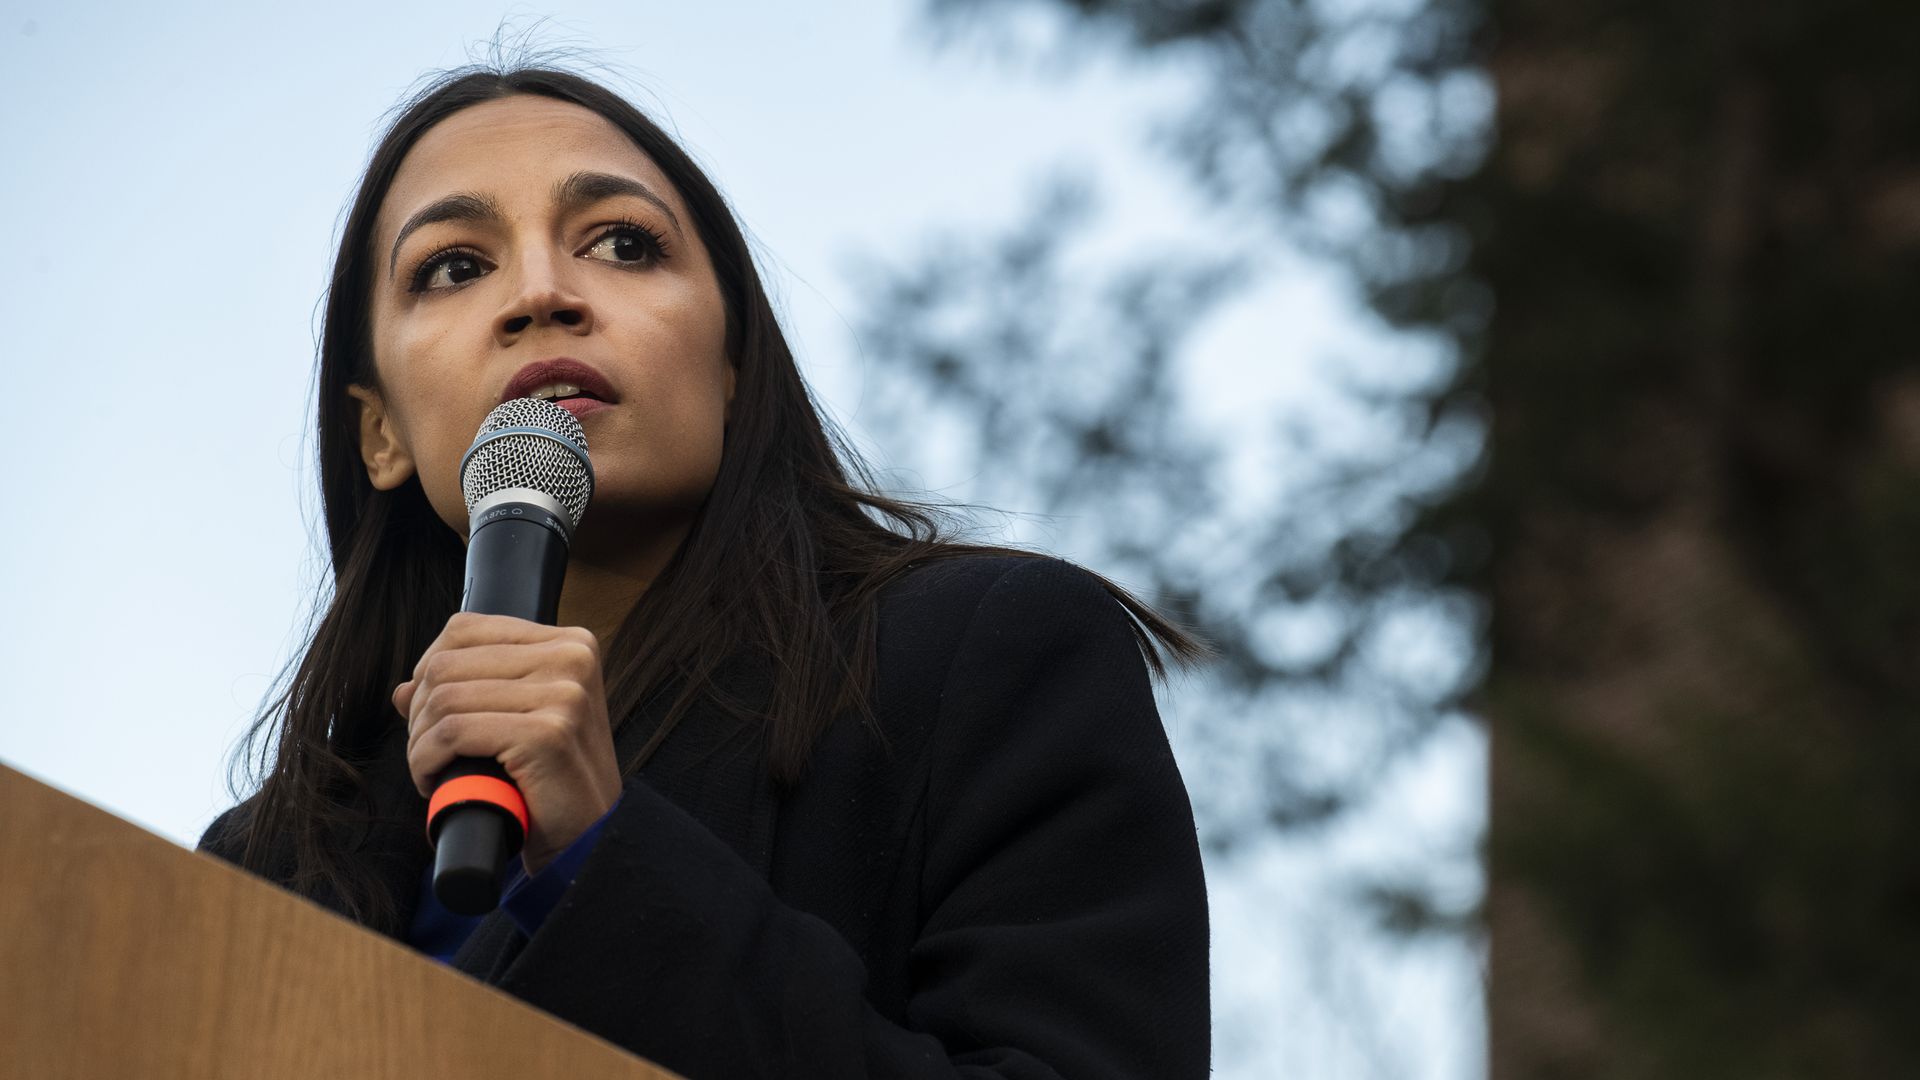 Rep. Alexandria Ocasio-Cortez addresses supporters during a campaign rally for Democratic presidential candidate Sen. Bernie Sanders on March 8